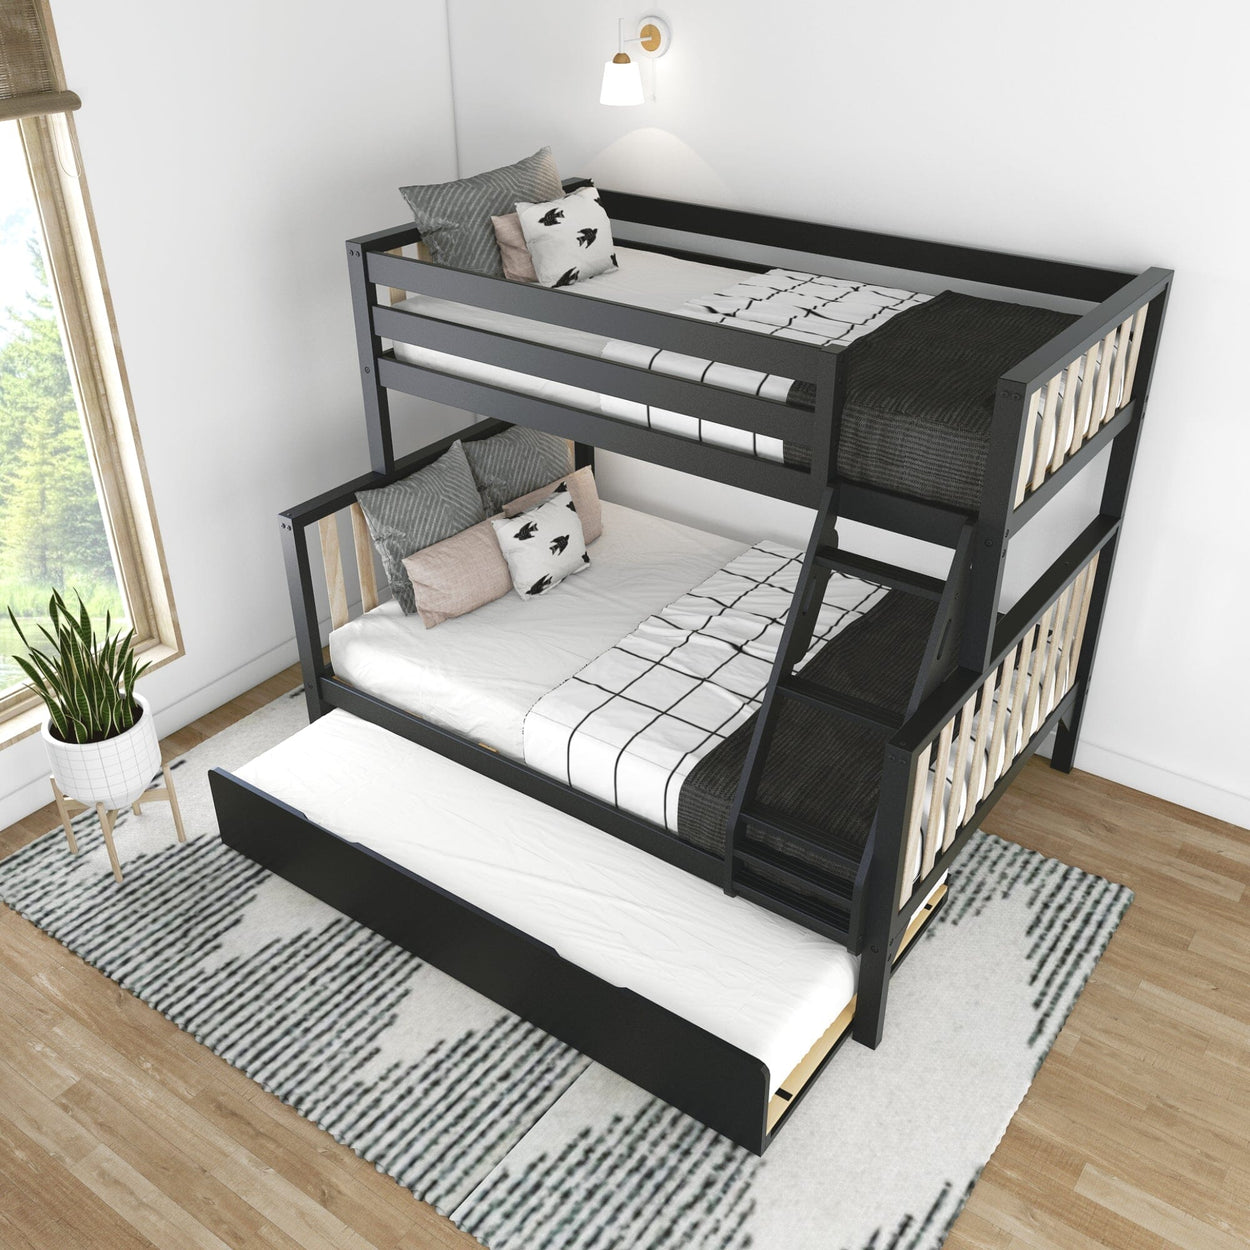 216231-272 : Bunk Beds Scandinavian Twin over Full Bunk Bed with Twin-Size Trundle, Black/Blonde